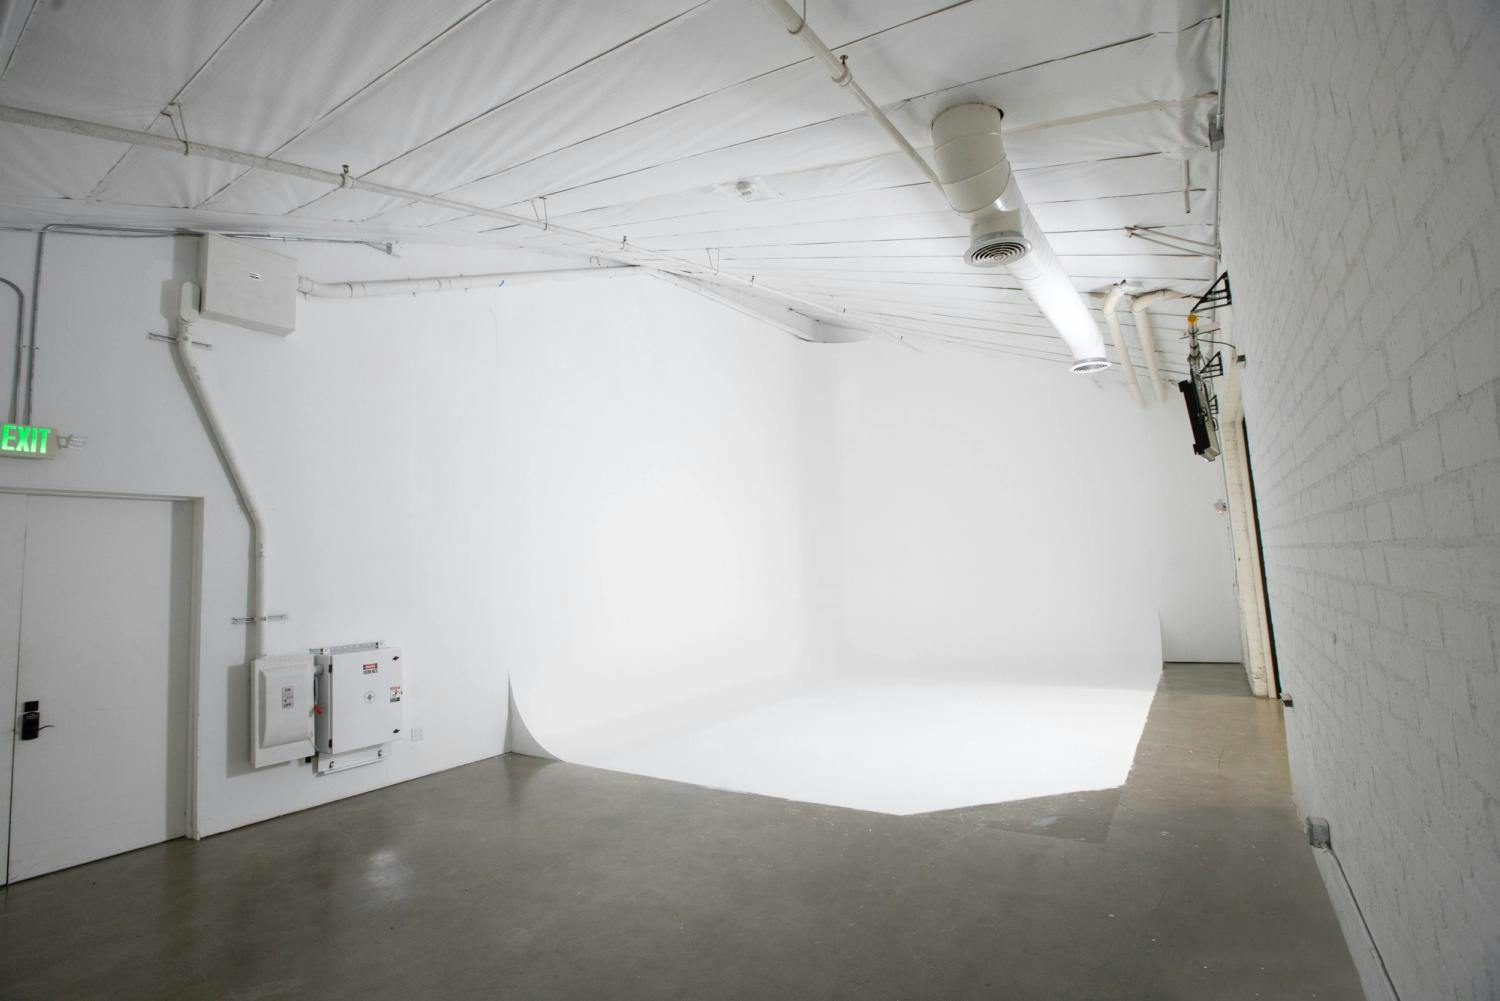 An empty photography studio with white walls and ceiling, featuring an HVAC duct, electrical panel, and concrete floor.